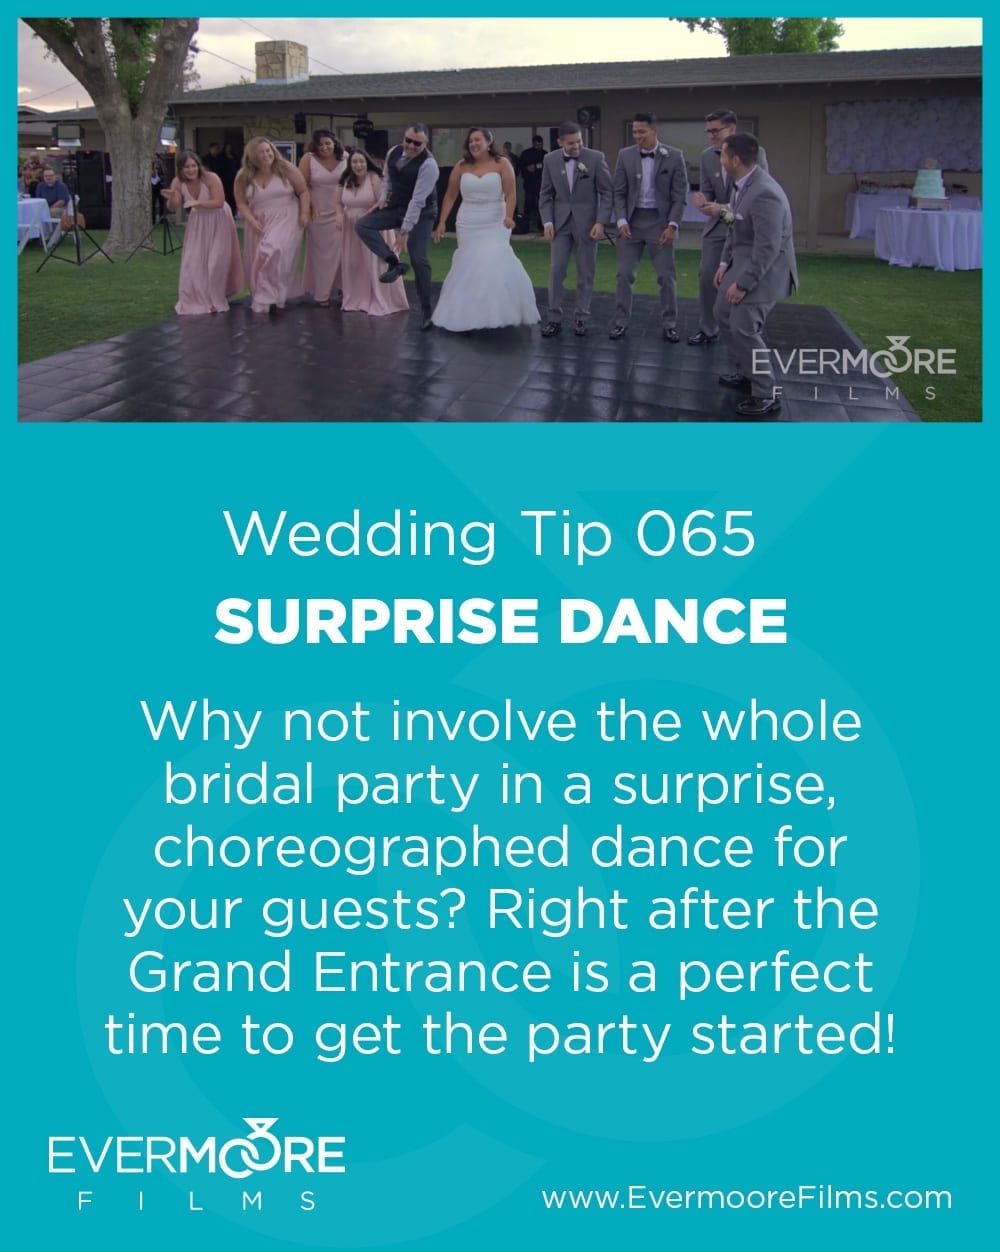 Surprise Dance | Wedding Tip 065 | Evermoore Films | Why not involve the whole bridal party in a surprise, choreographed dance for your guests? Right after the Grand Entrance is a perfect time to get the party started!